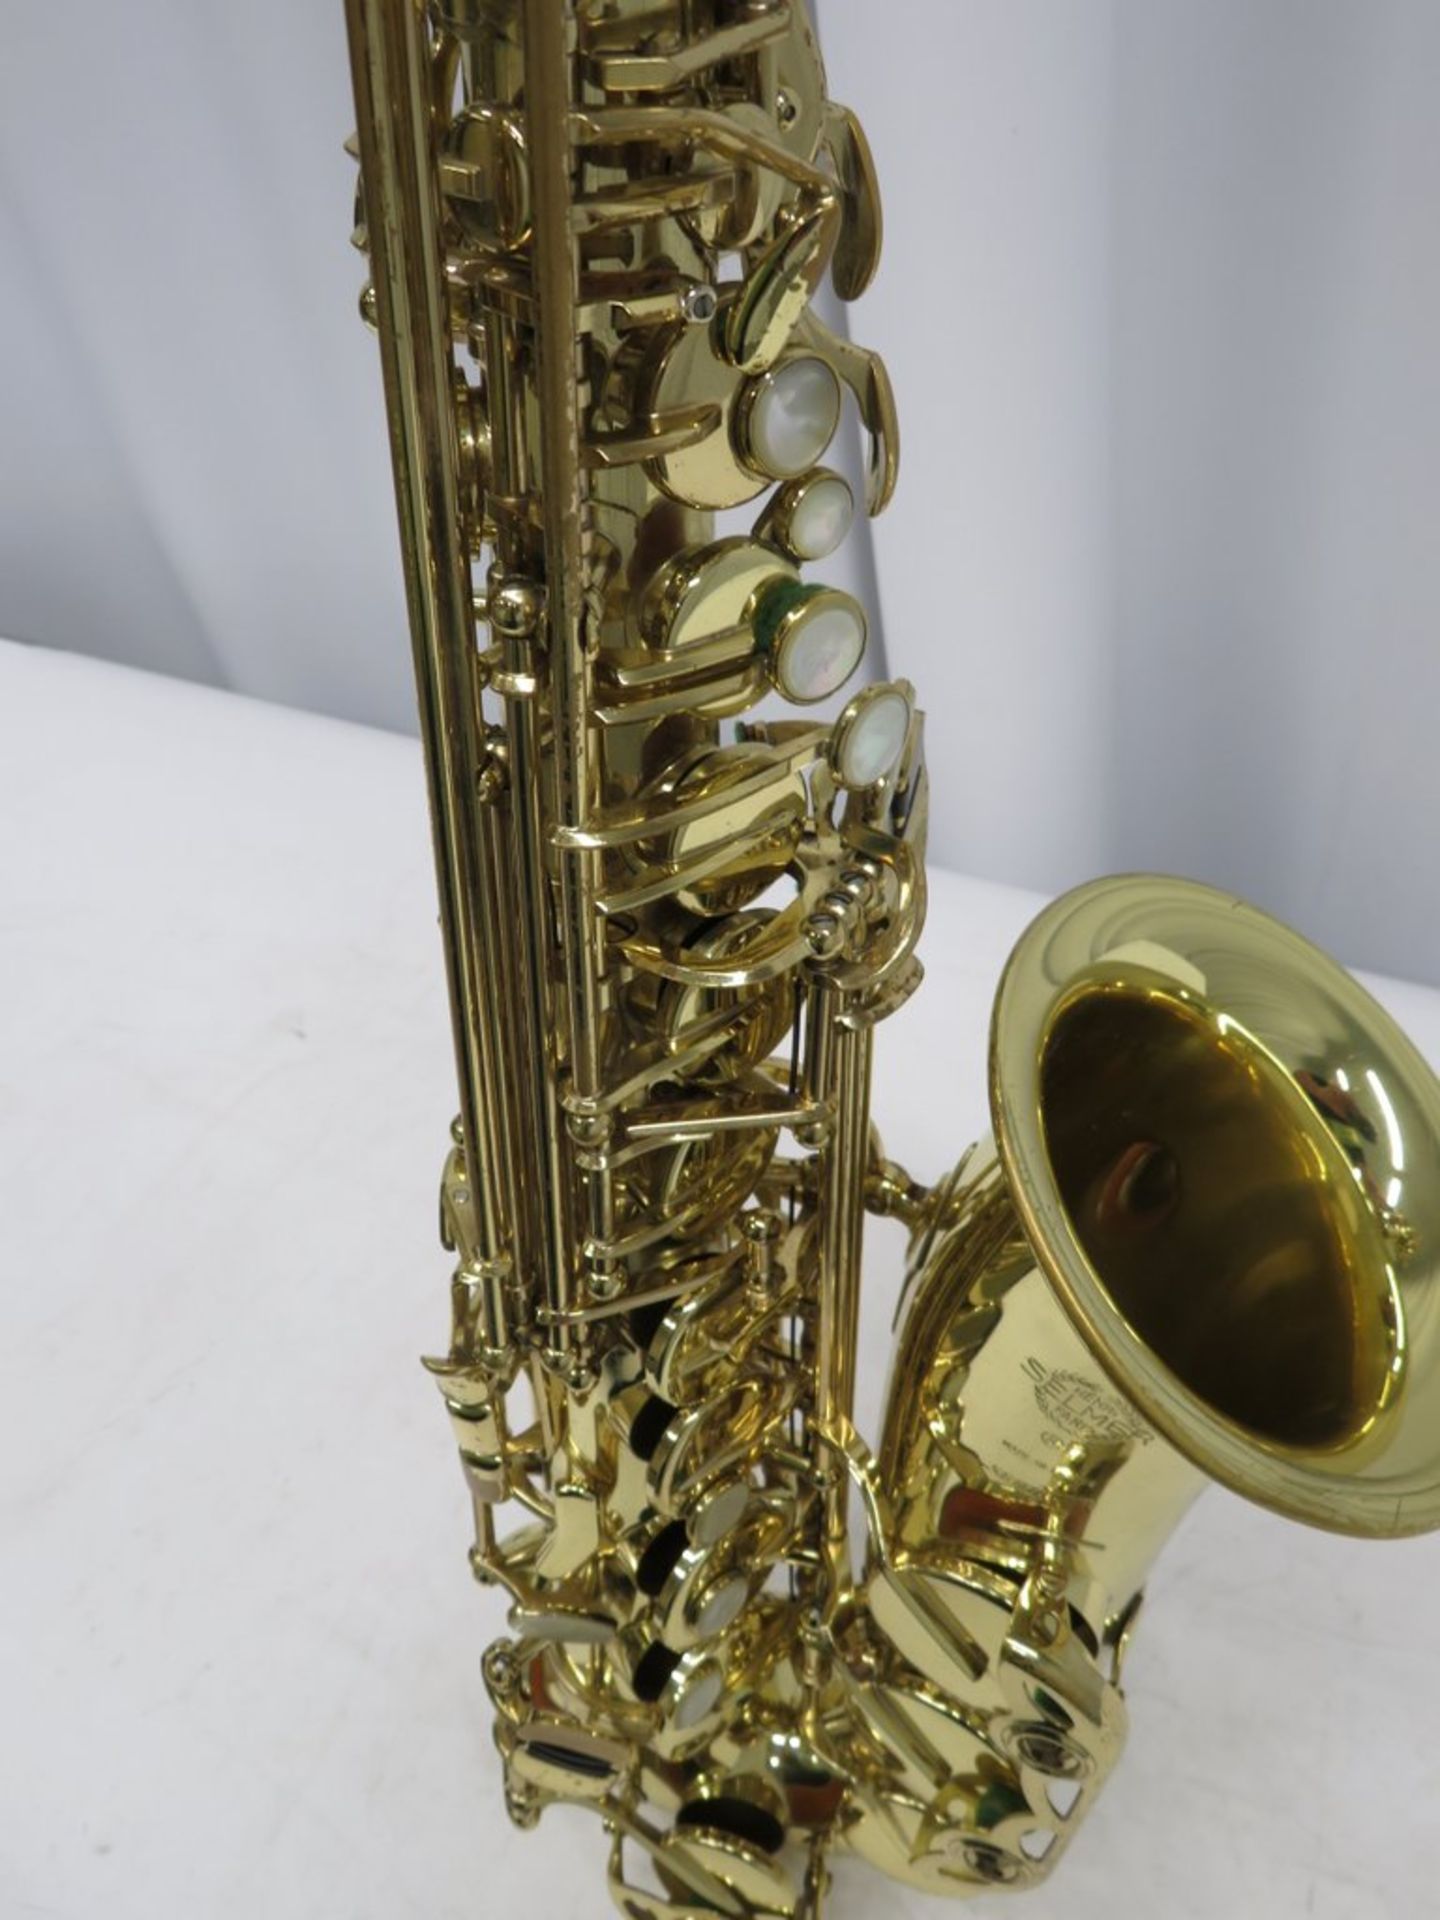 Henri Selmer 80 Super Action Serie 3 alto saxophone with case. Serial number: N.622903 - Image 10 of 21